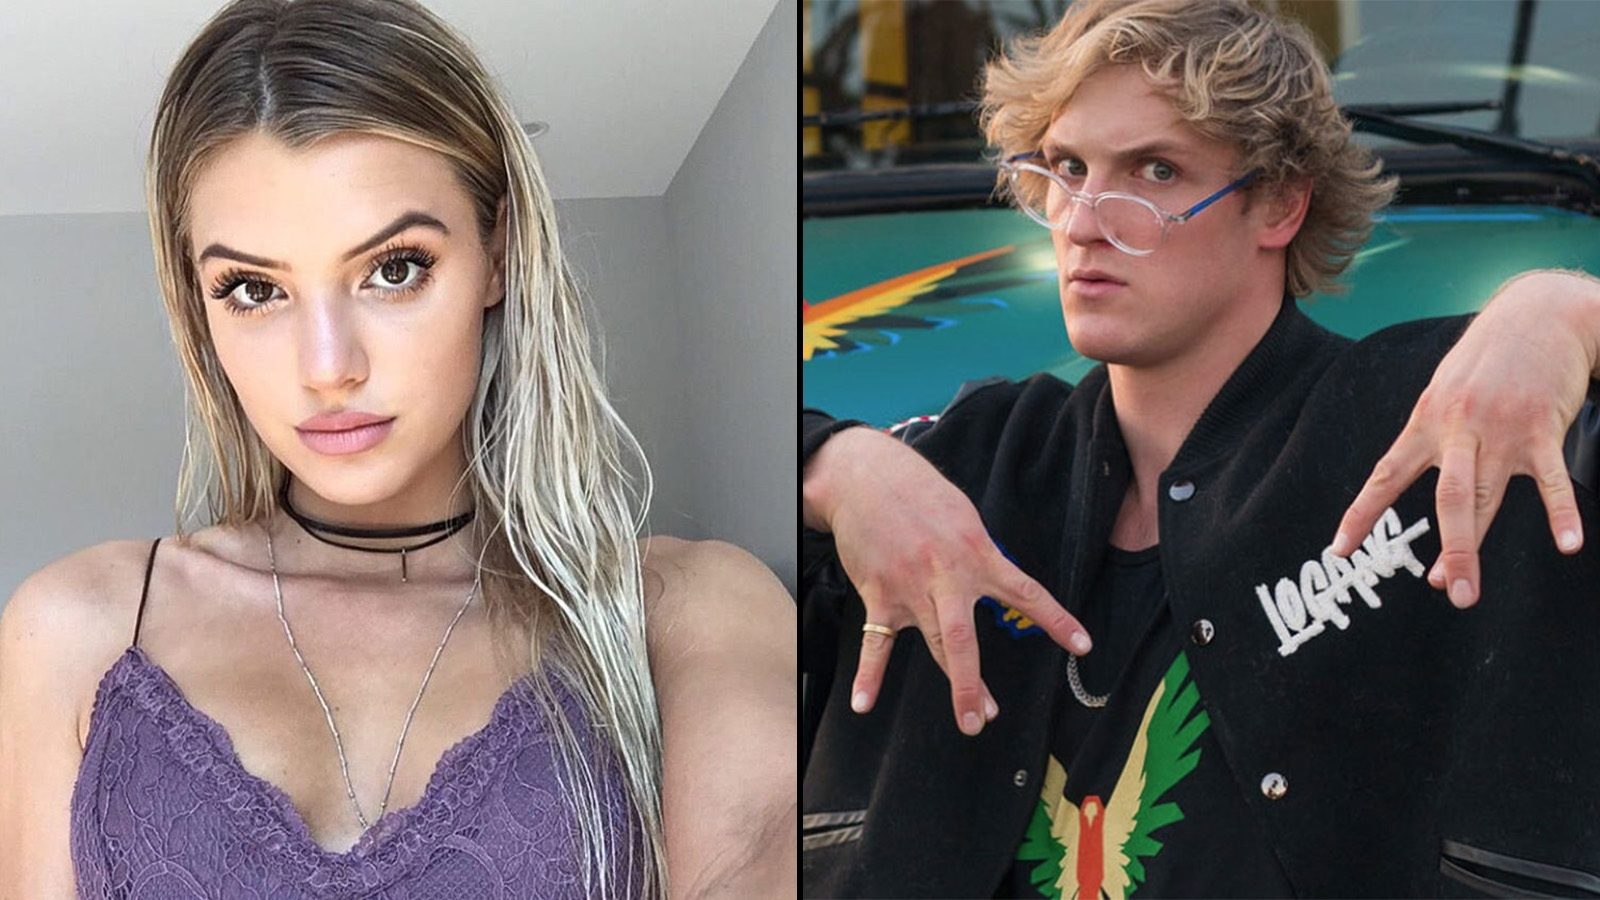 Alissa Violet leaks texts with Logan Paul over cheating controversy